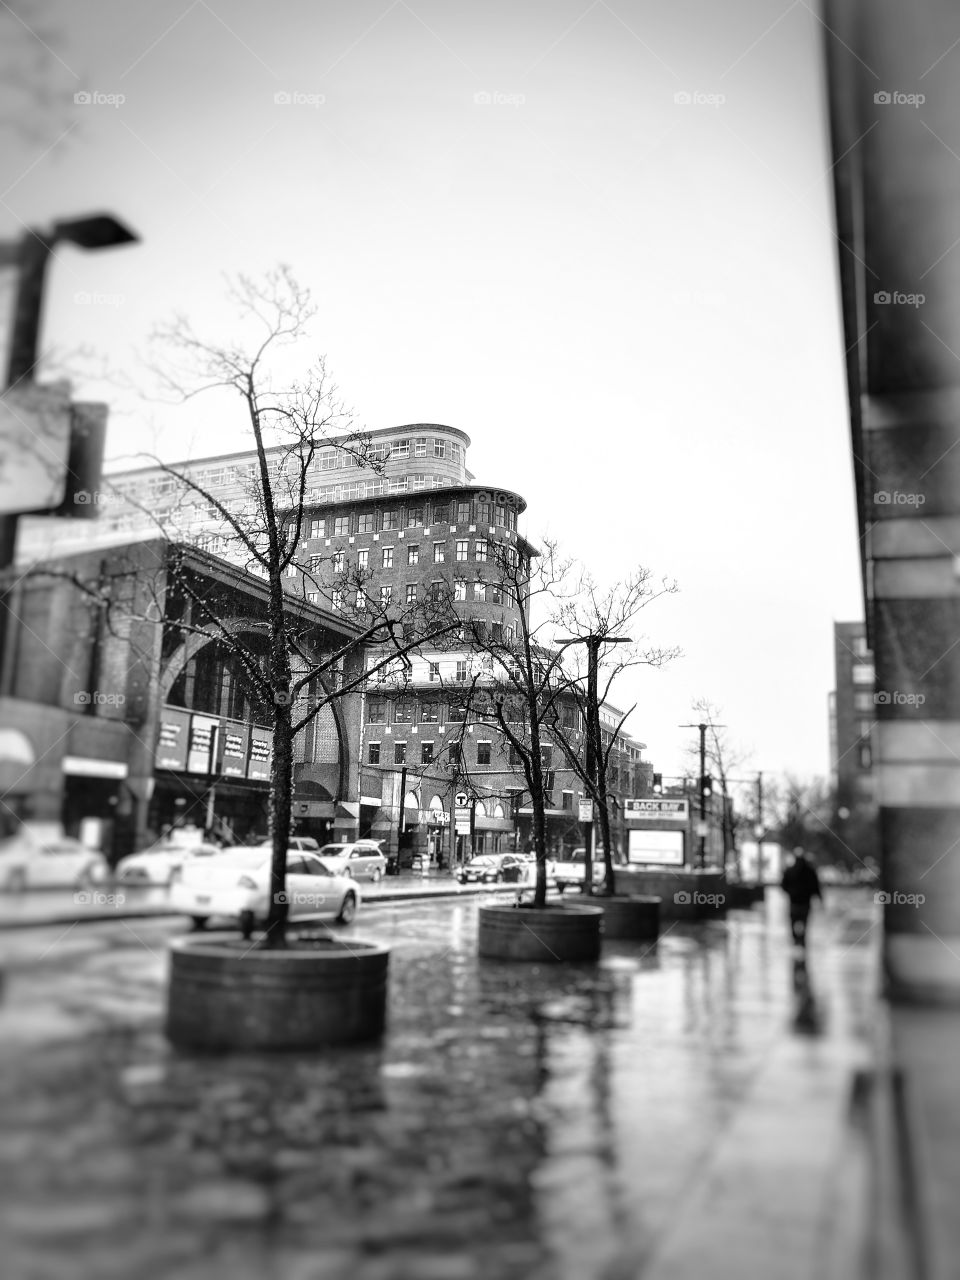 The quietness of the city on a rainy day. The beauty temporarily suppressed by the season of rain and snow